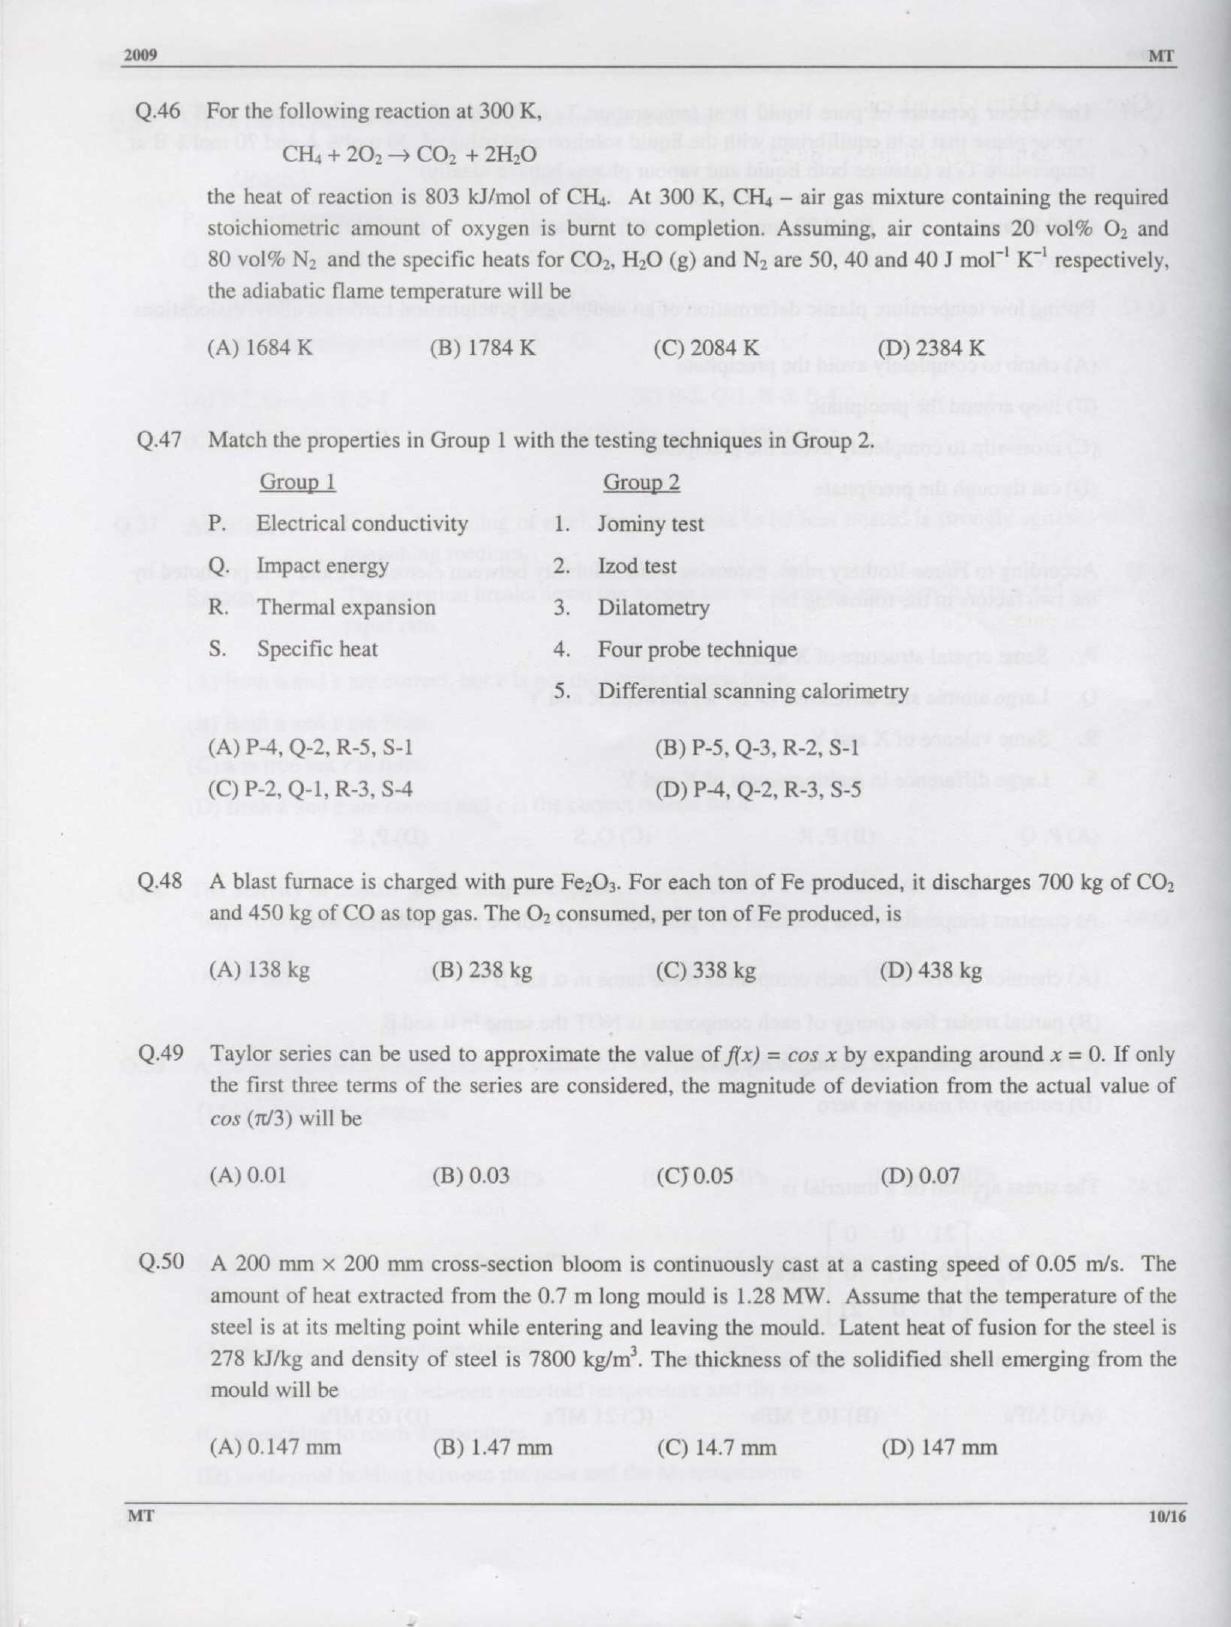 GATE 2009 Metallurgical Engineering (MT) Question Paper with Answer Key - Page 10